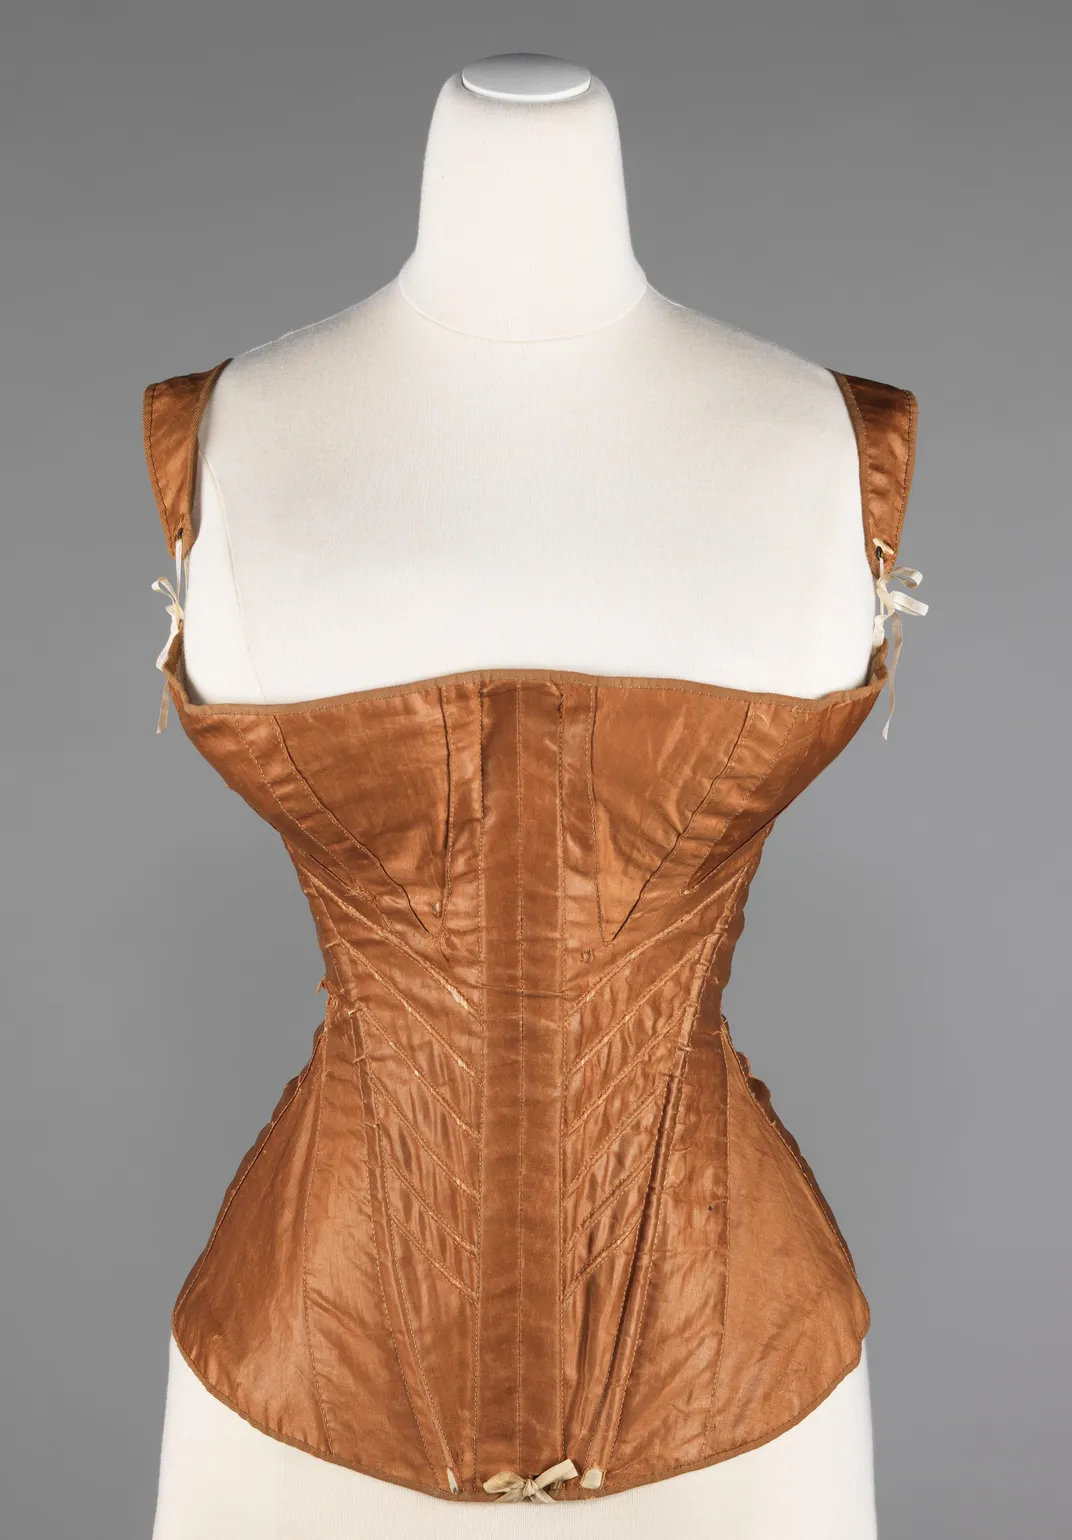 Are  trustworthy for corsets? I've been looking at one on EMP for  around £50, but discovered the same one for a fraction of the price on  . Is this too good